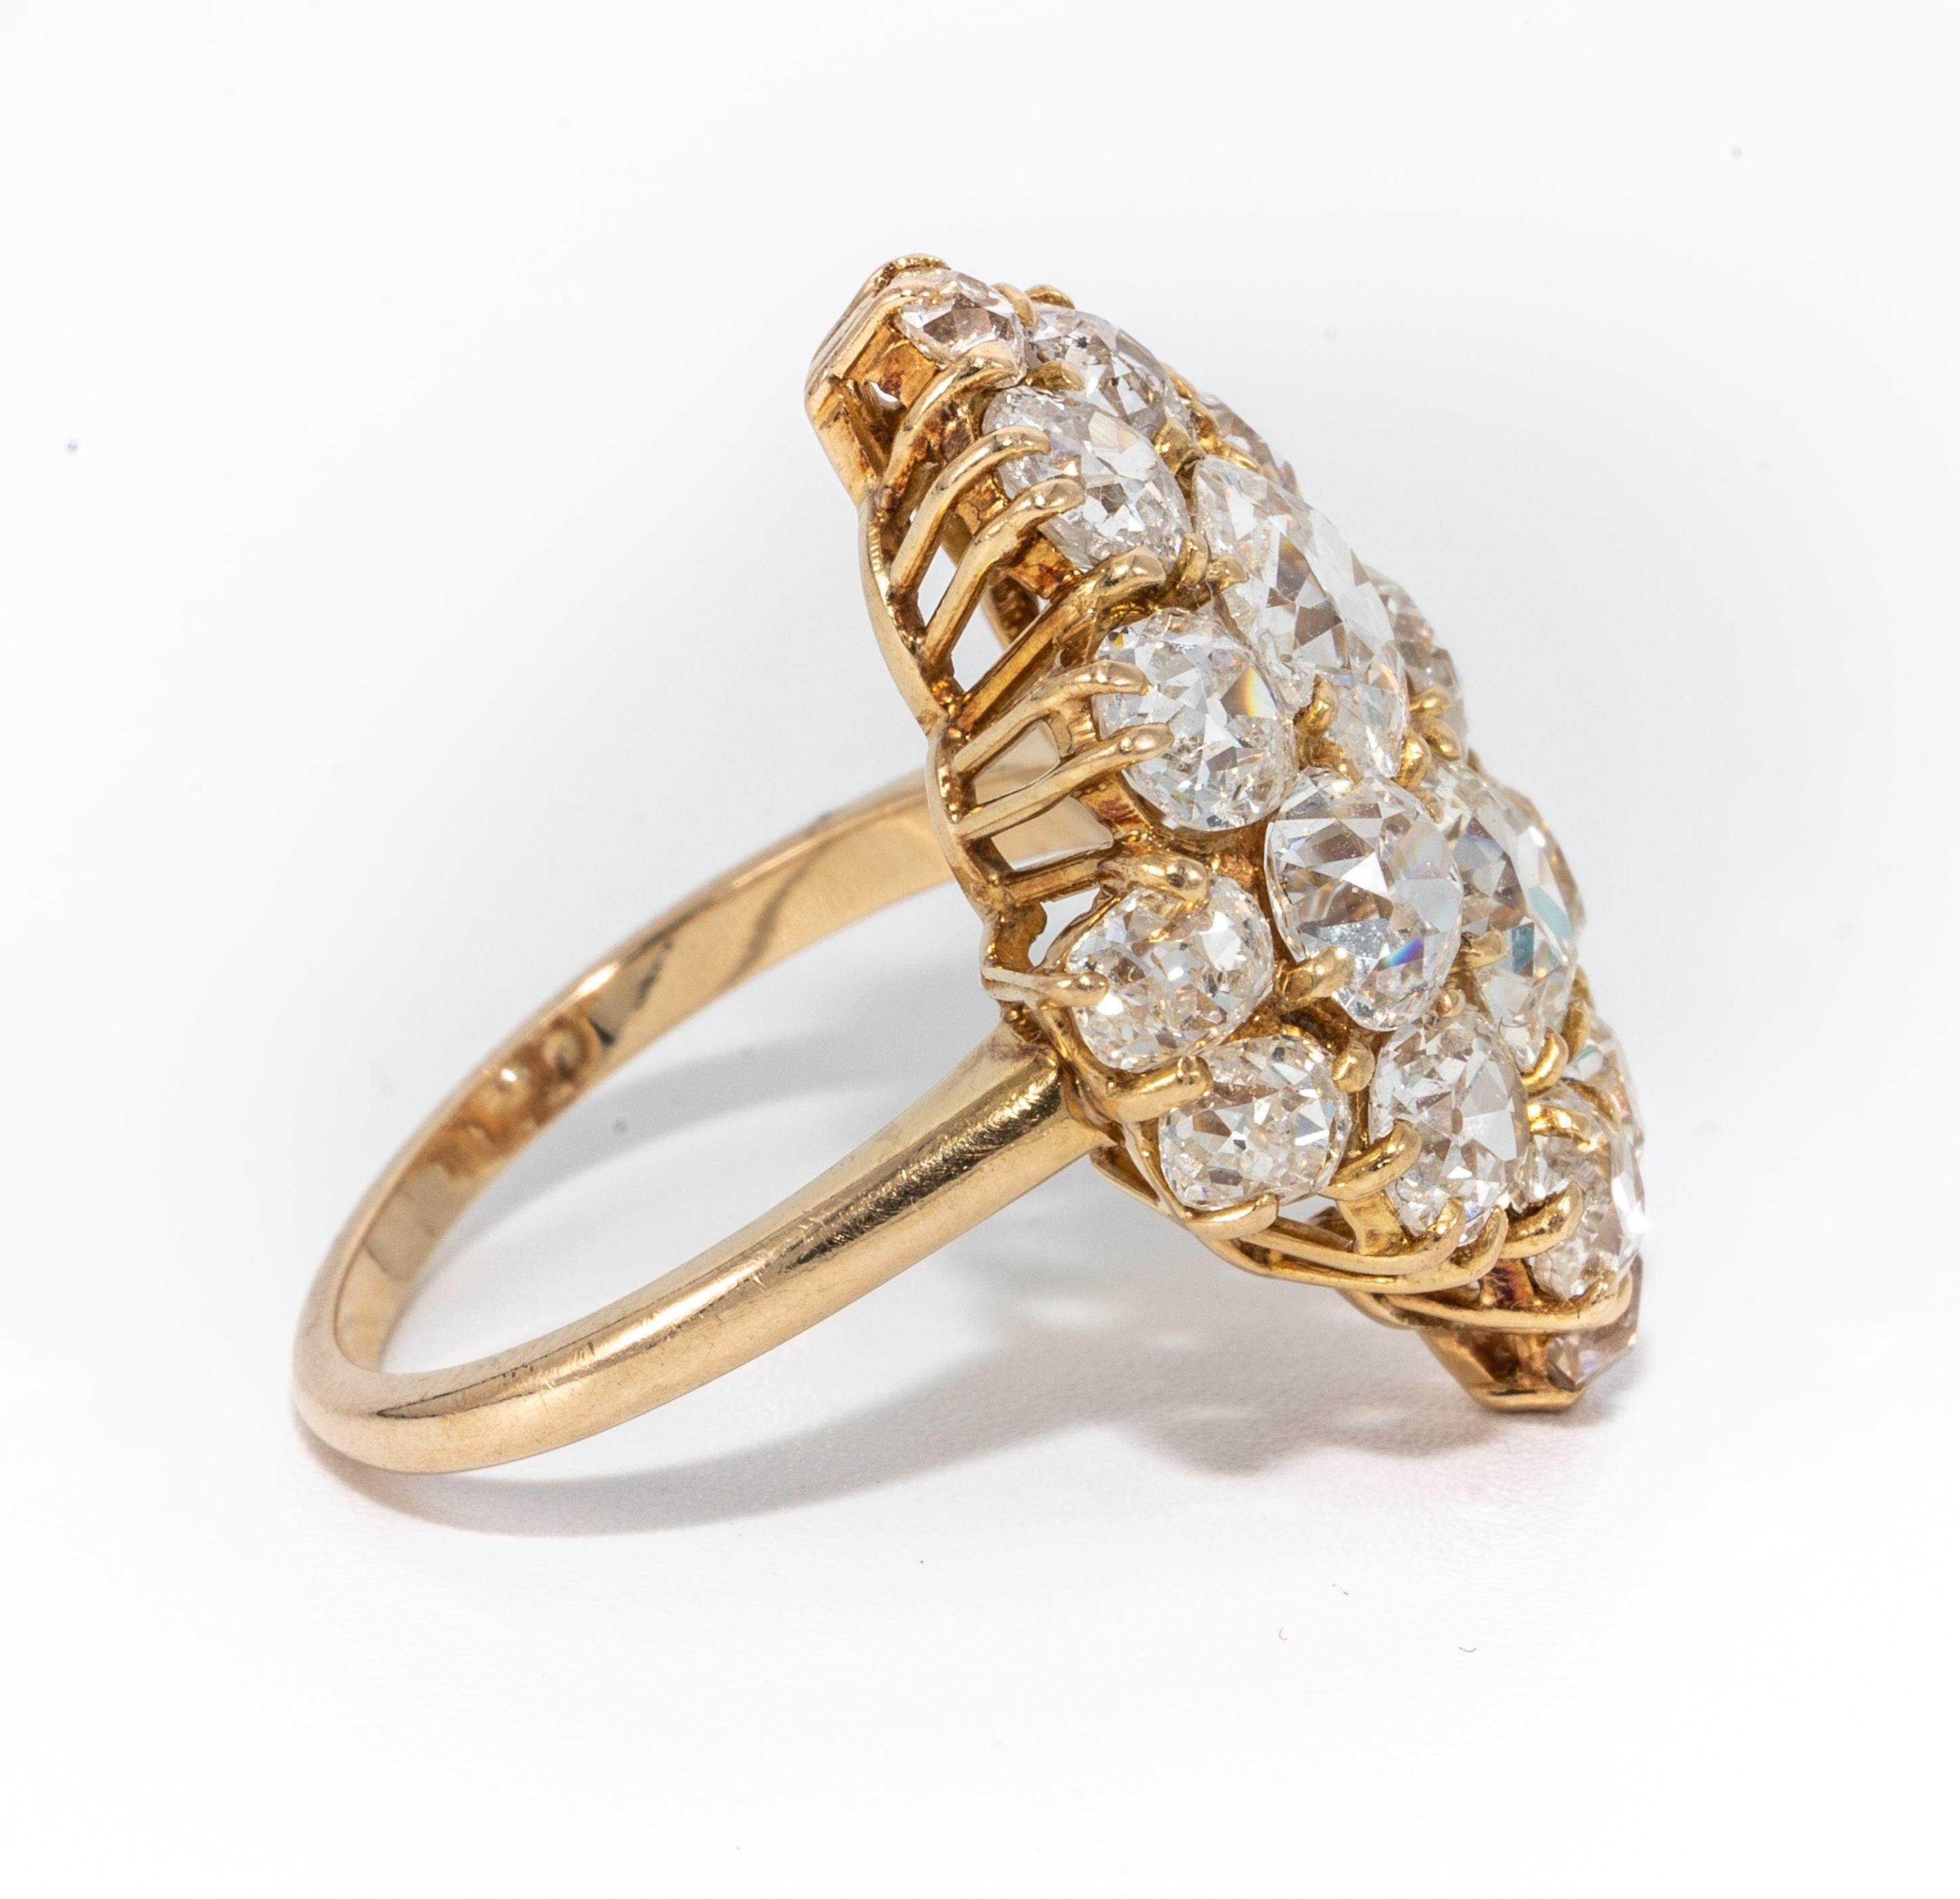 Late Victorian Antique Victorian Diamond Cluster Ring with Old Mine Cuts Approximate 6.48 Carat